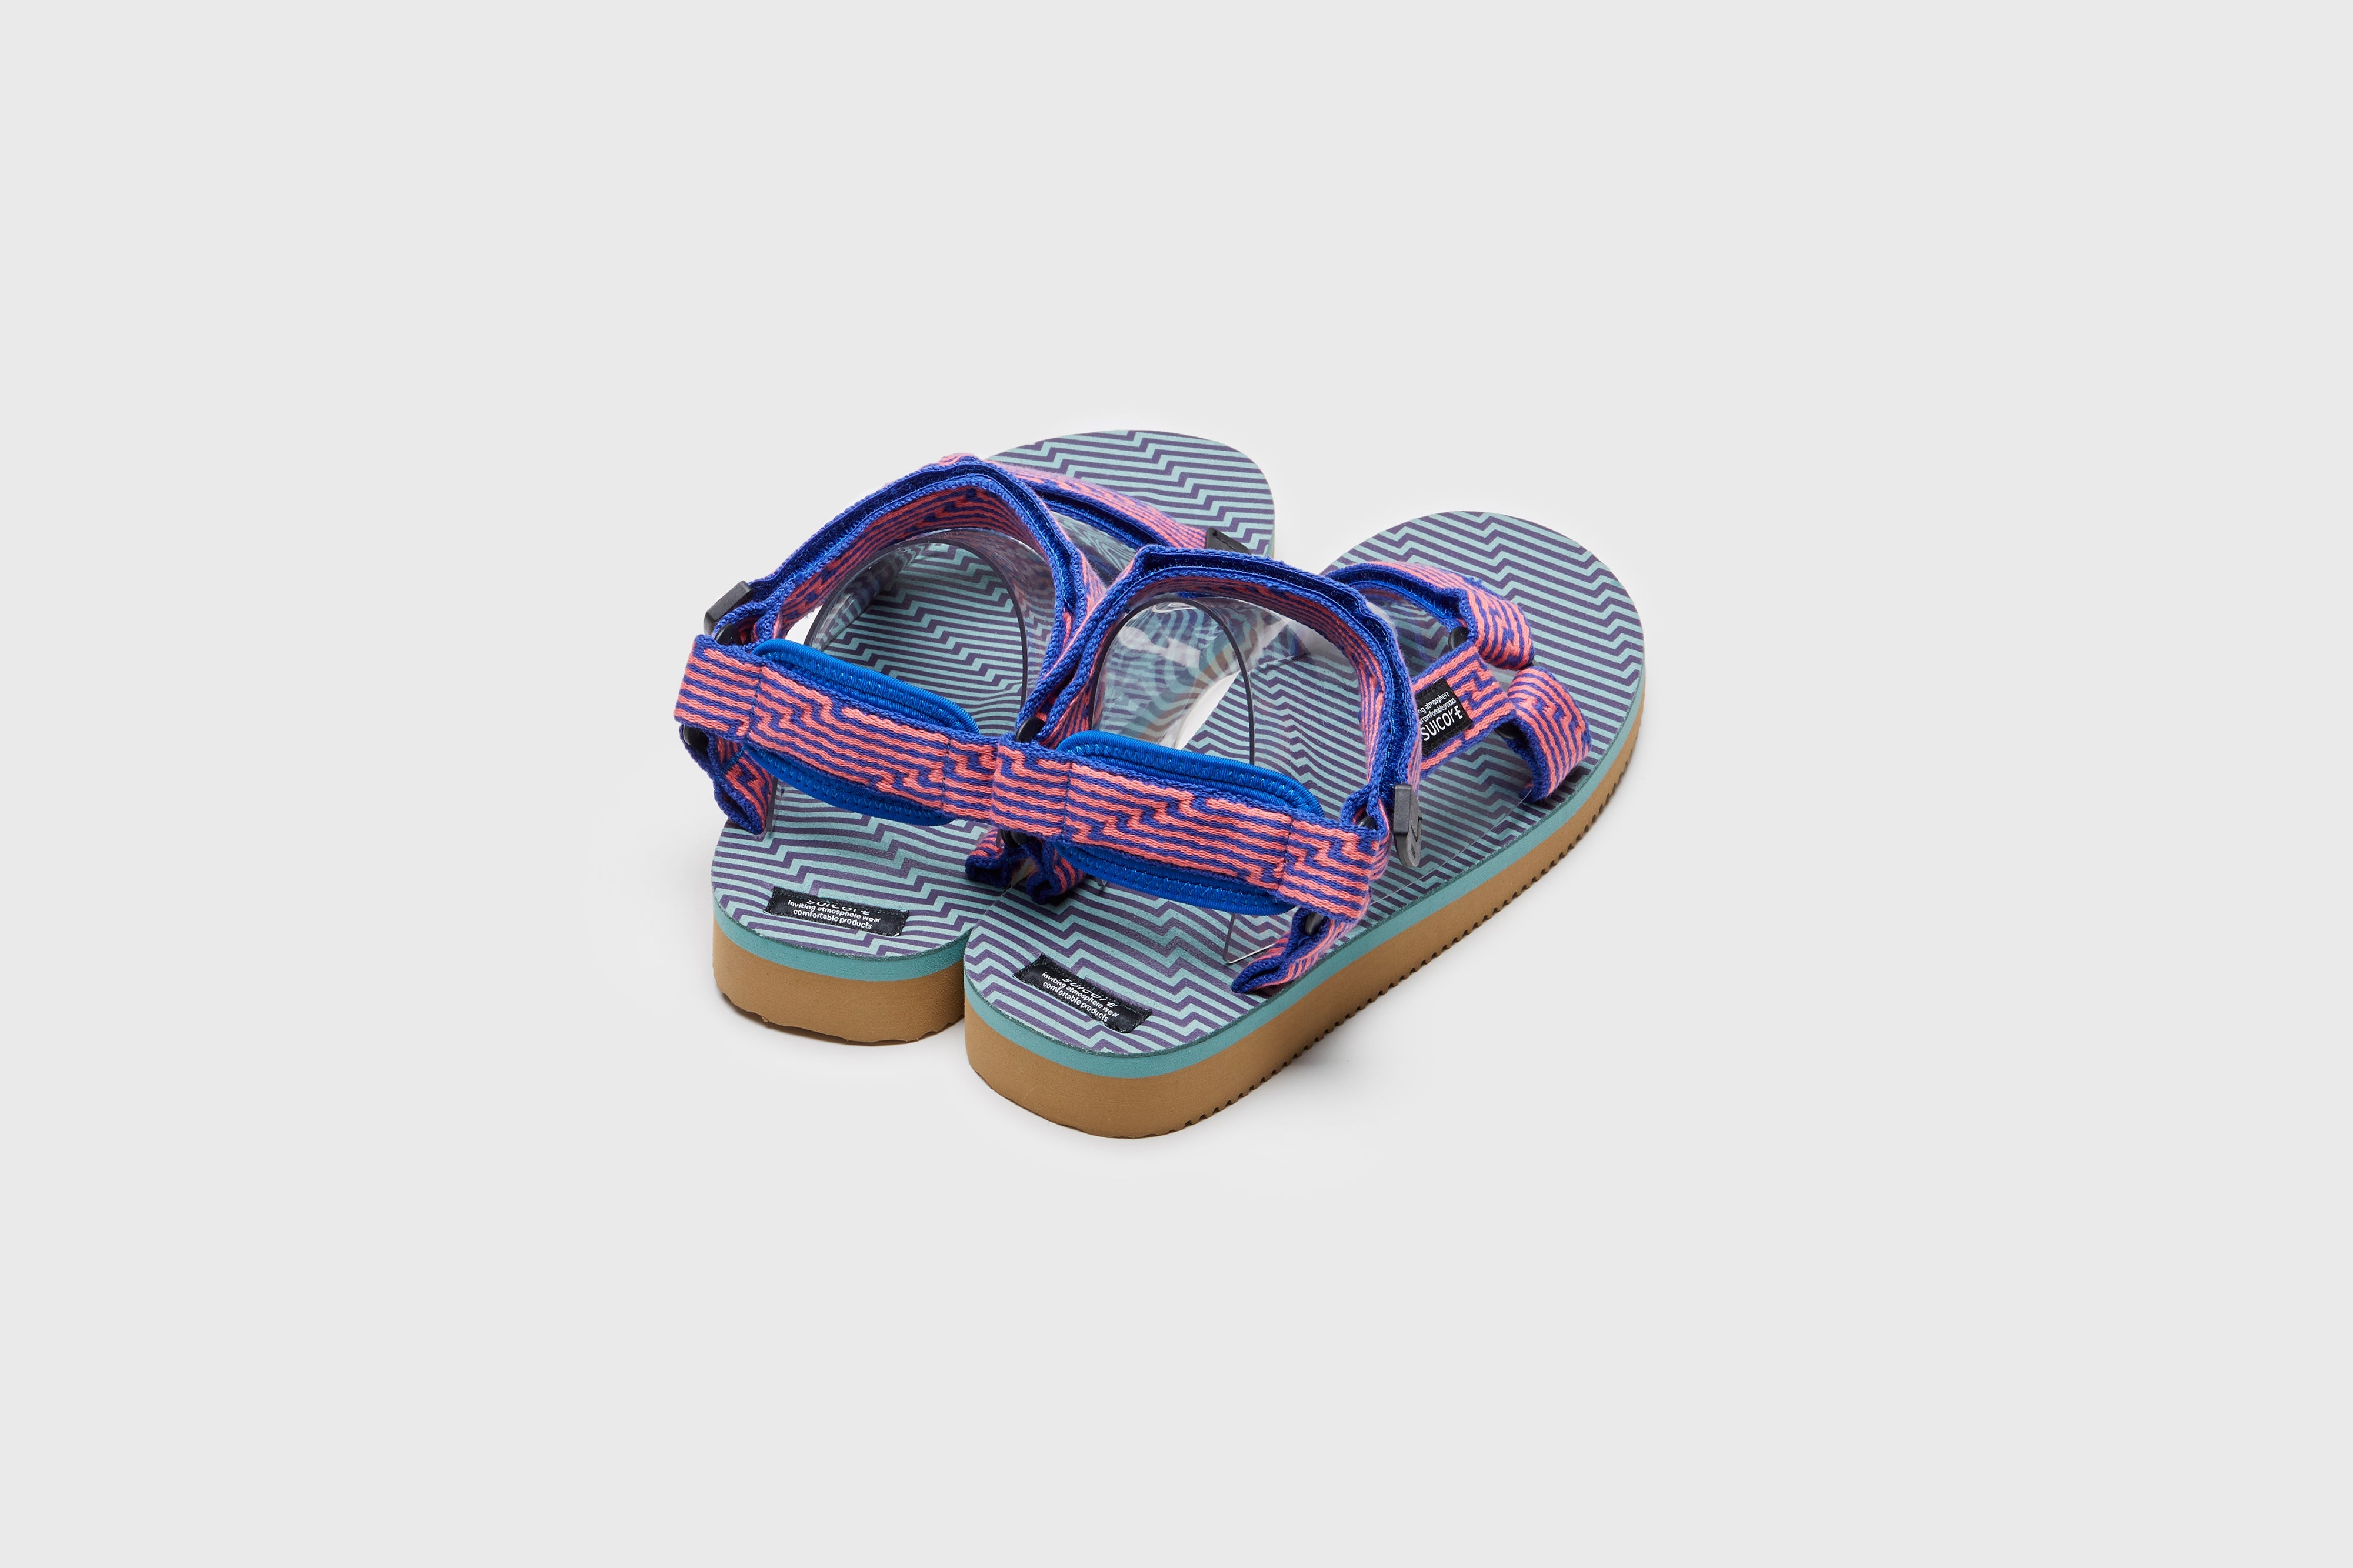 SUICOKE DEPA-JC01 sandals with orange & blue nylon upper, orange & blue midsole and sole, strap and logo patch. From Spring/Summer 2023 collection on eightywingold Web Store, an official partner of SUICOKE. OG-022-JC01 ORANGE X BLUE